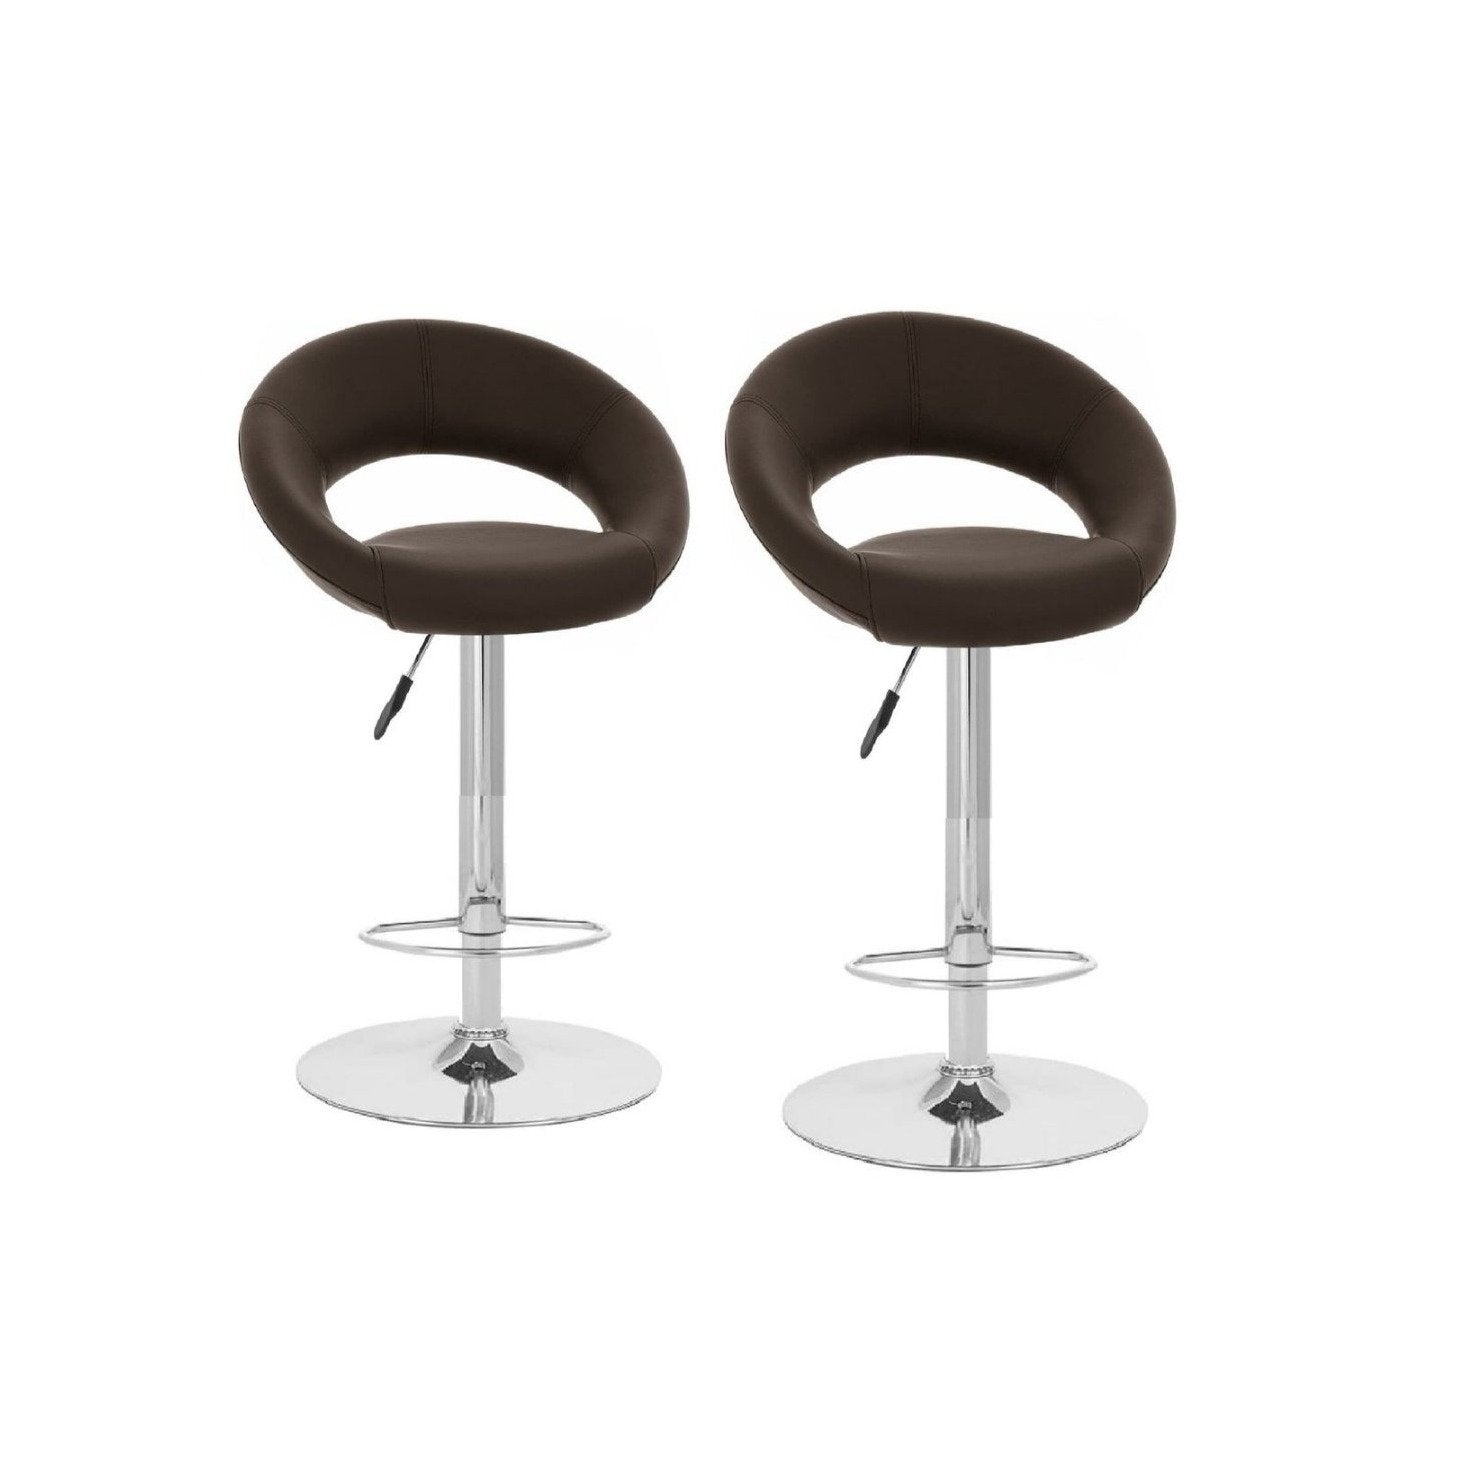 Leather Plush Bar Stools - Set of Two - Brown Colour